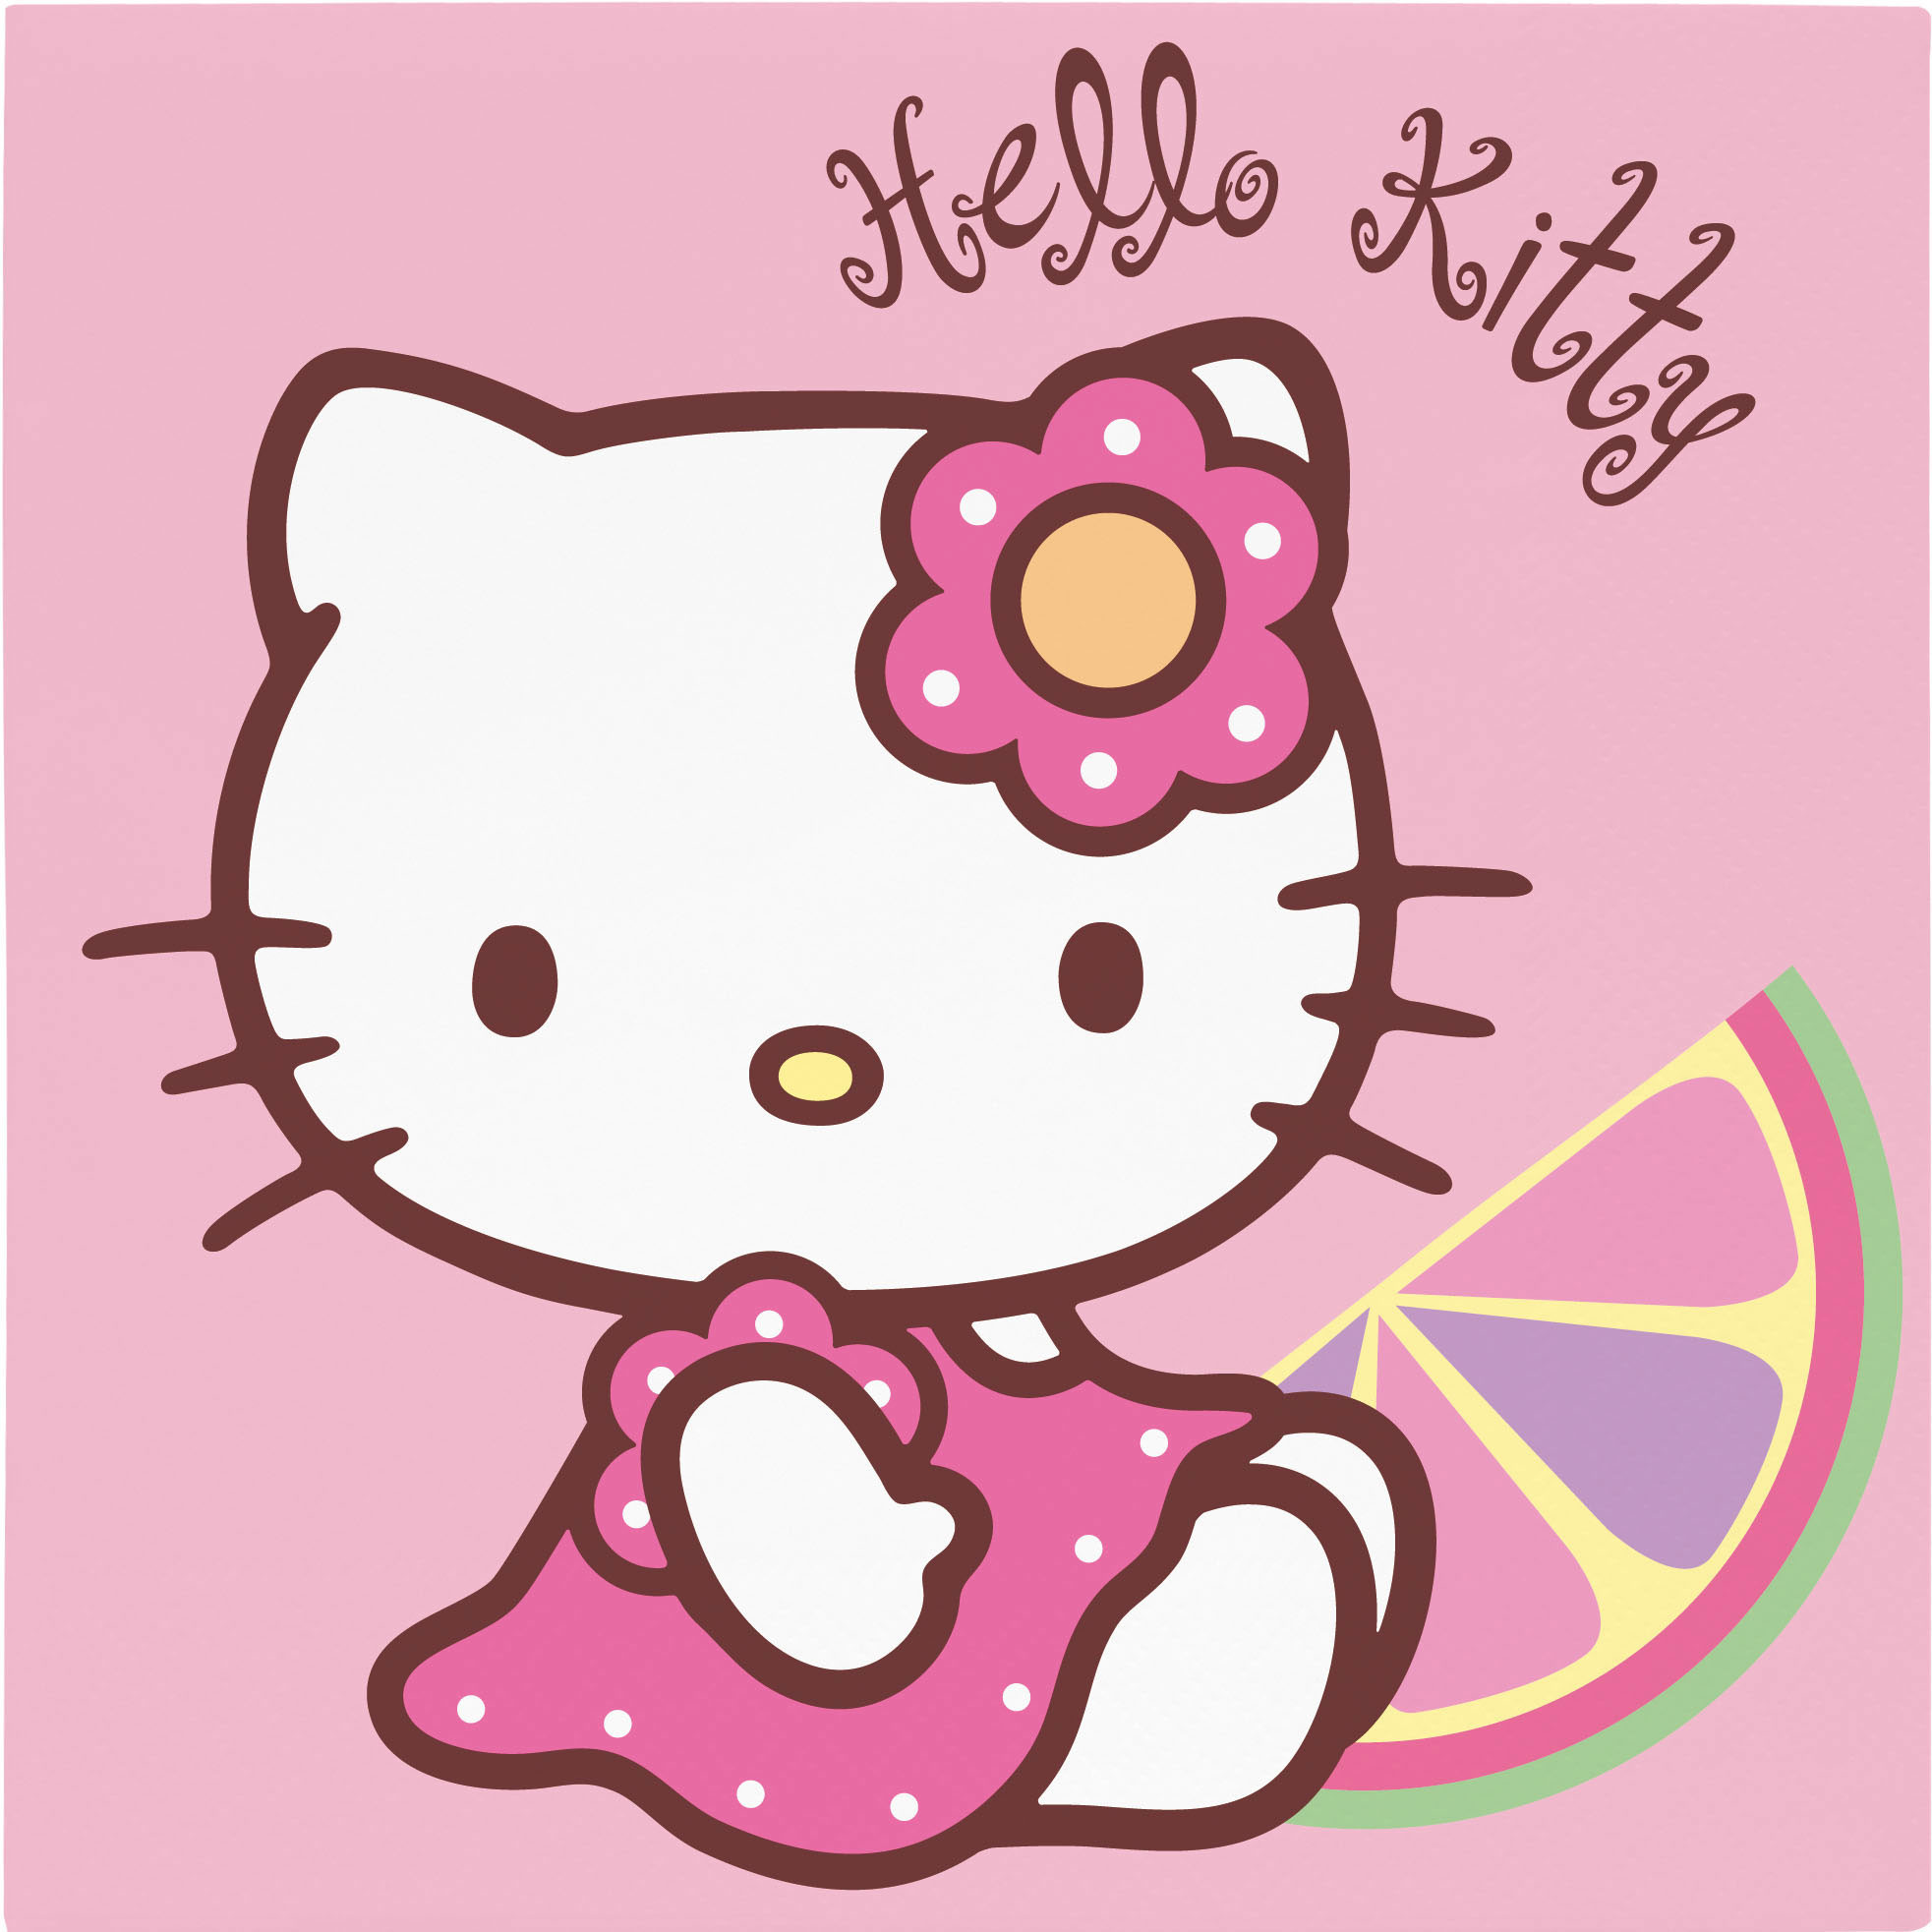 Net Sanrio Images My Melody Wallpaper Hd Wallpaper - Hello Kitty Images Hd - HD Wallpaper 